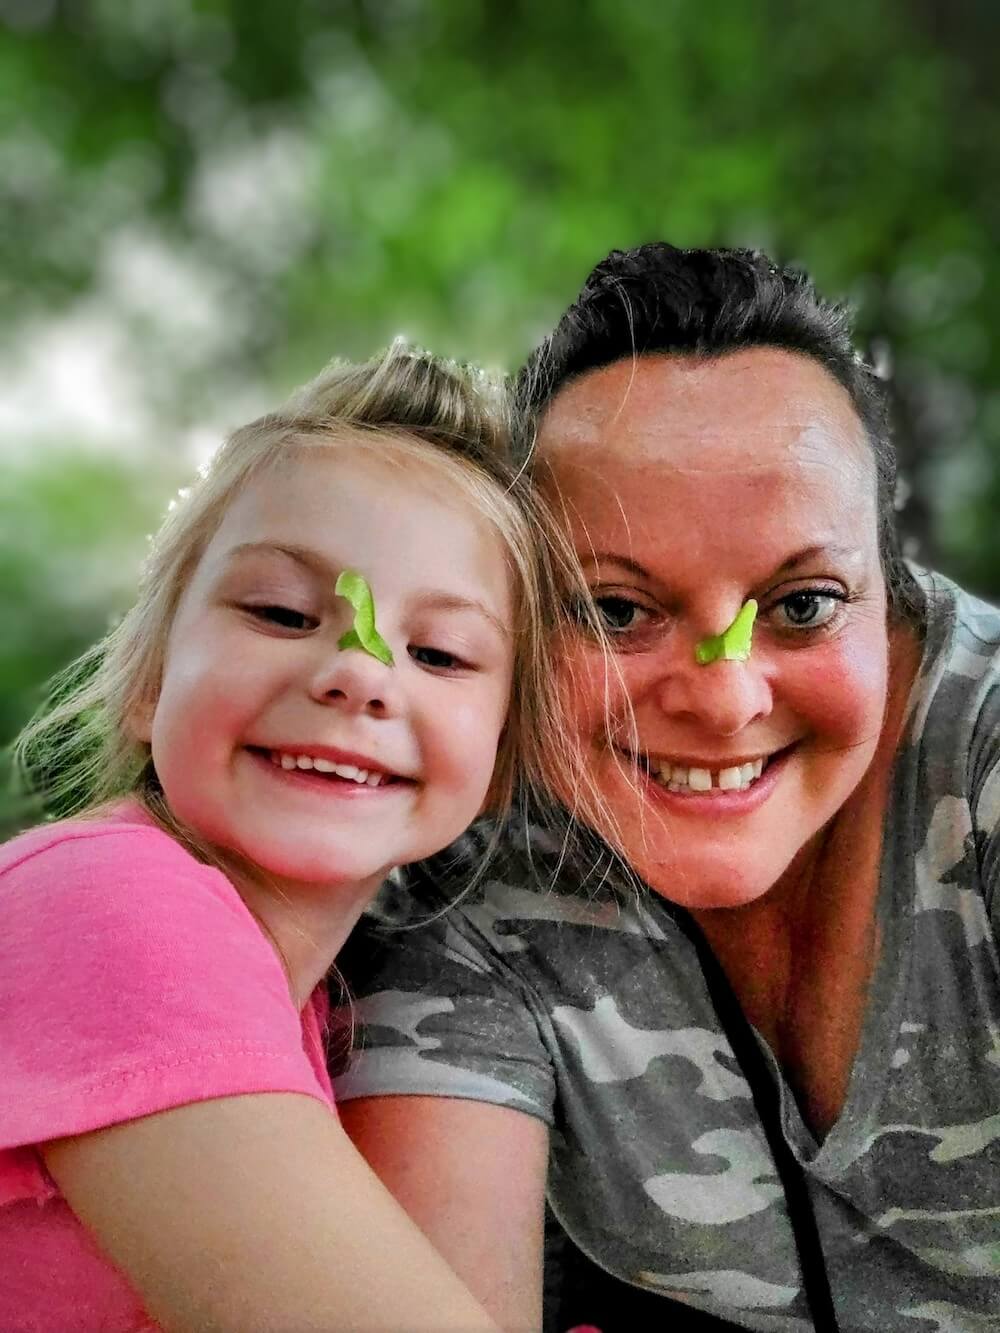 heather with a child both with green helicopter seeds stuck to their noses